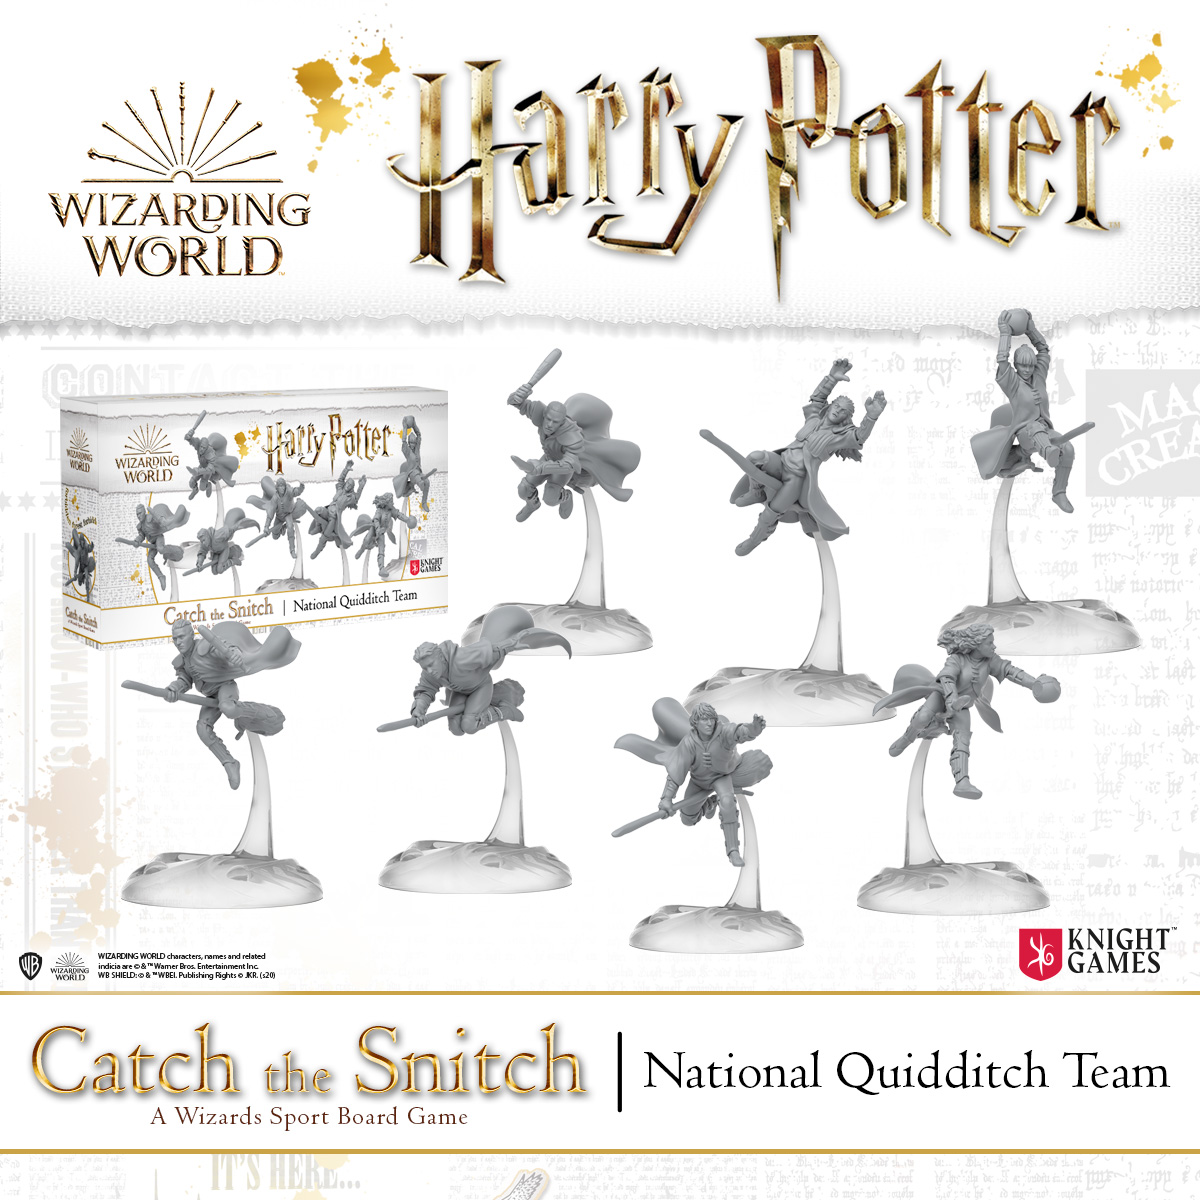 Harry Potter: Catch the Snitch brings quidditch to the tabletop as a  miniatures game